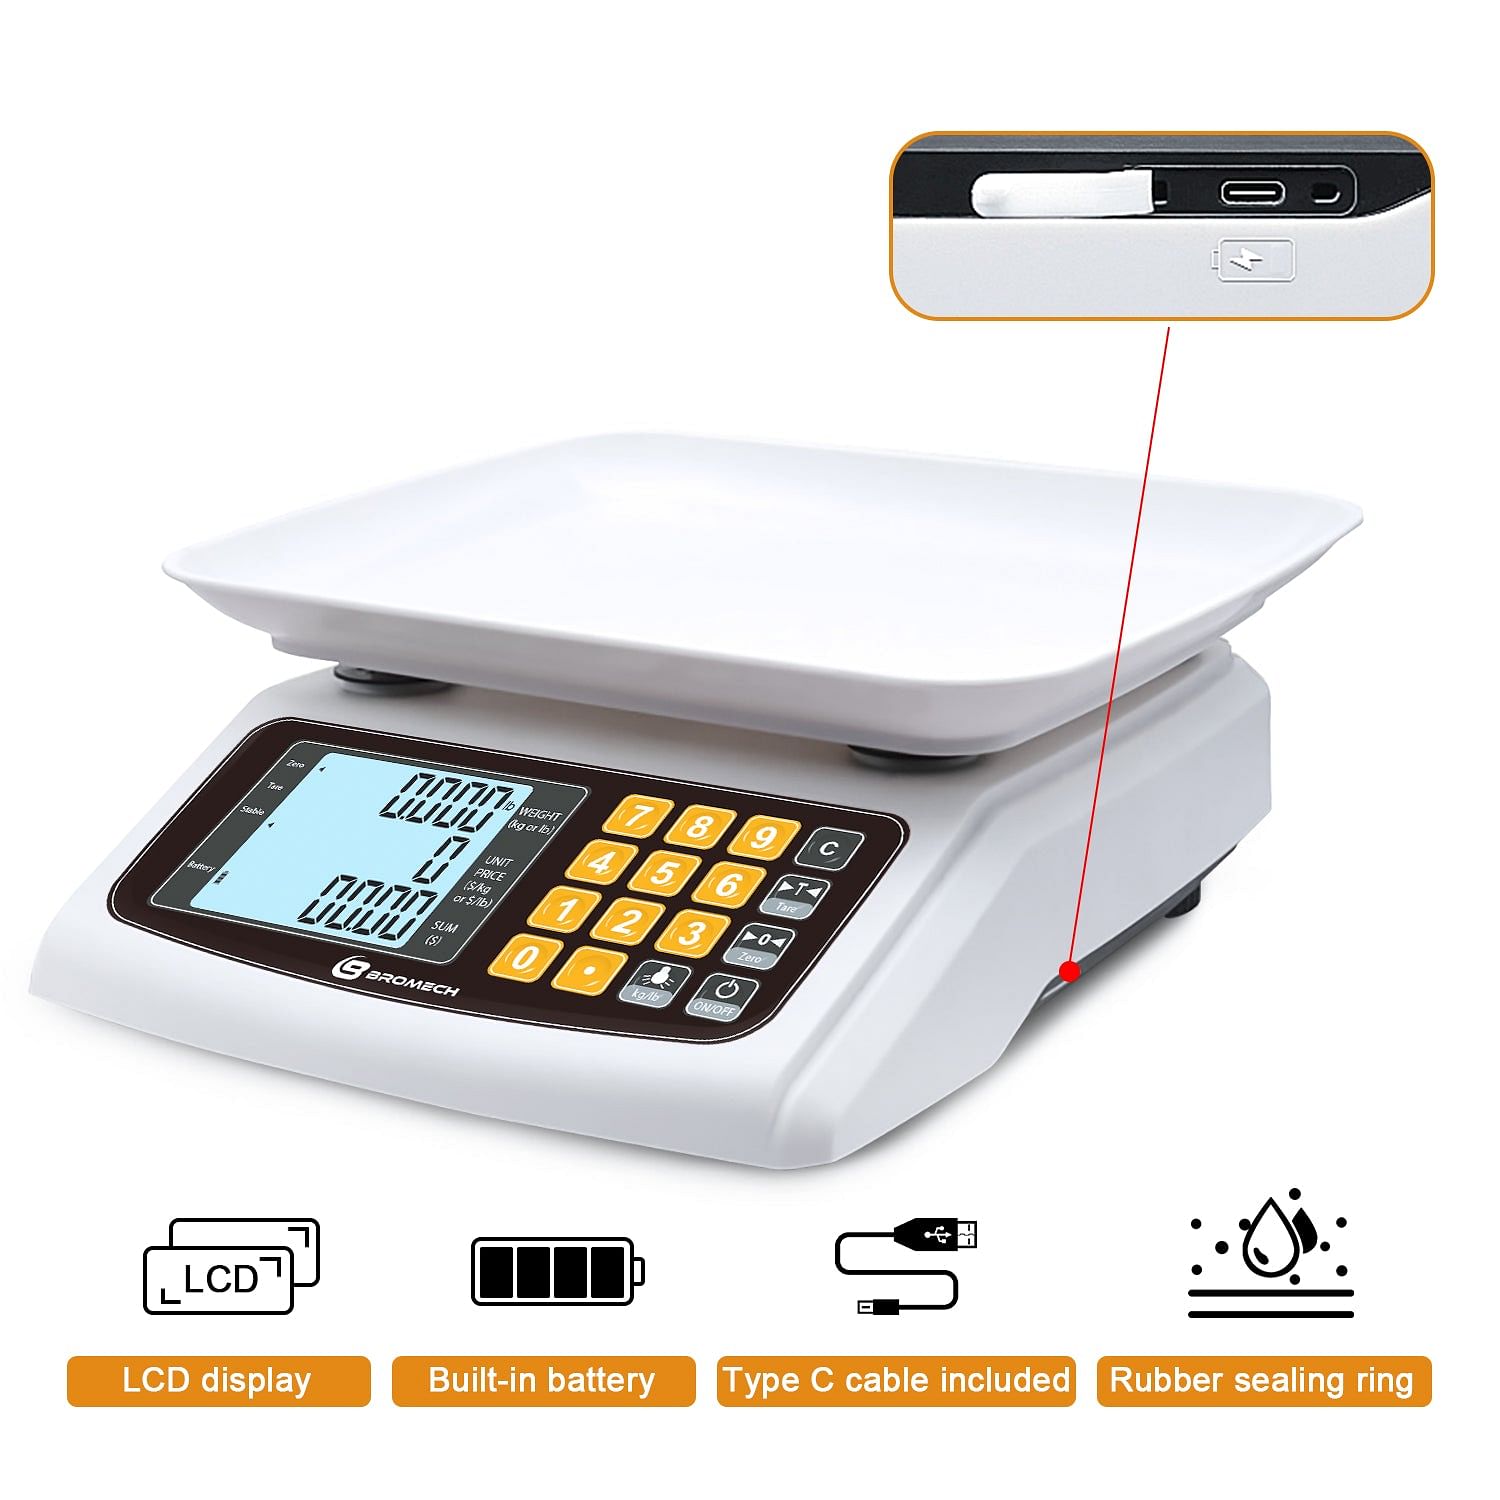 Bromech 66lb Digital Price Computing Scale, USB Rechargeable Commercial  Food Meat Produce Scale